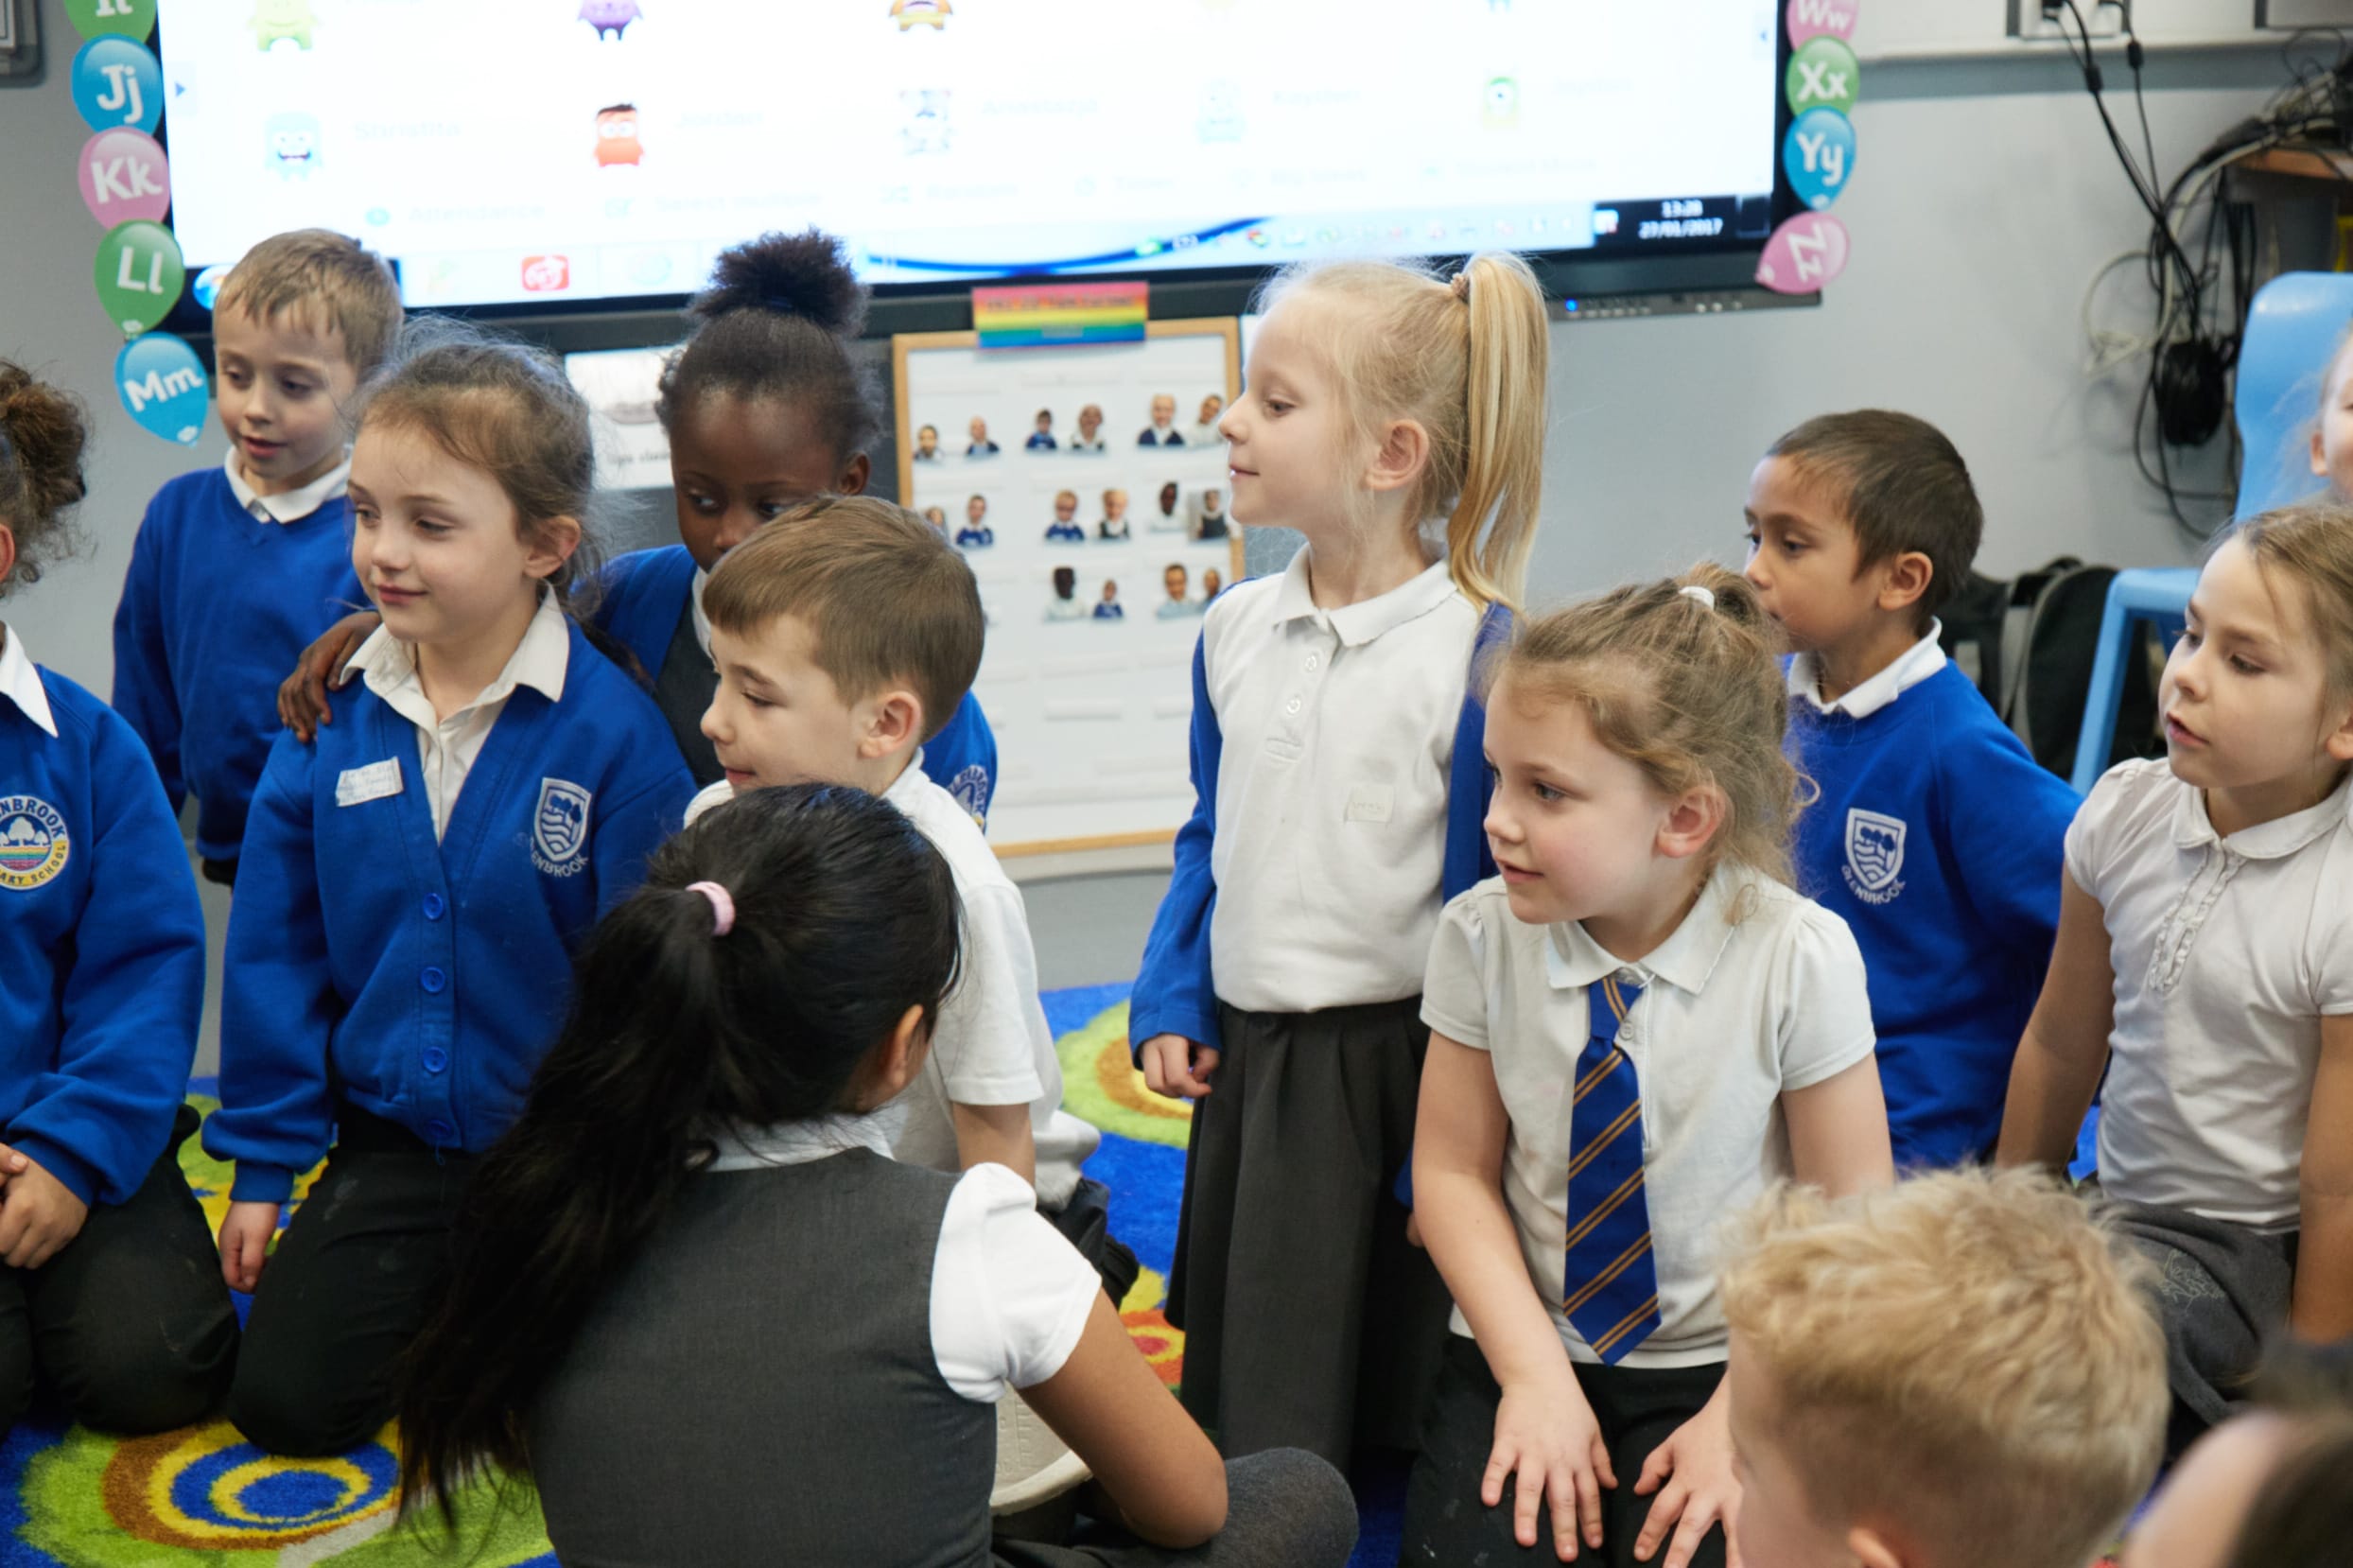 A dozen primary school children in blue, white and grey uniforms smiling and looking inquisitively at something out of shot of the image.